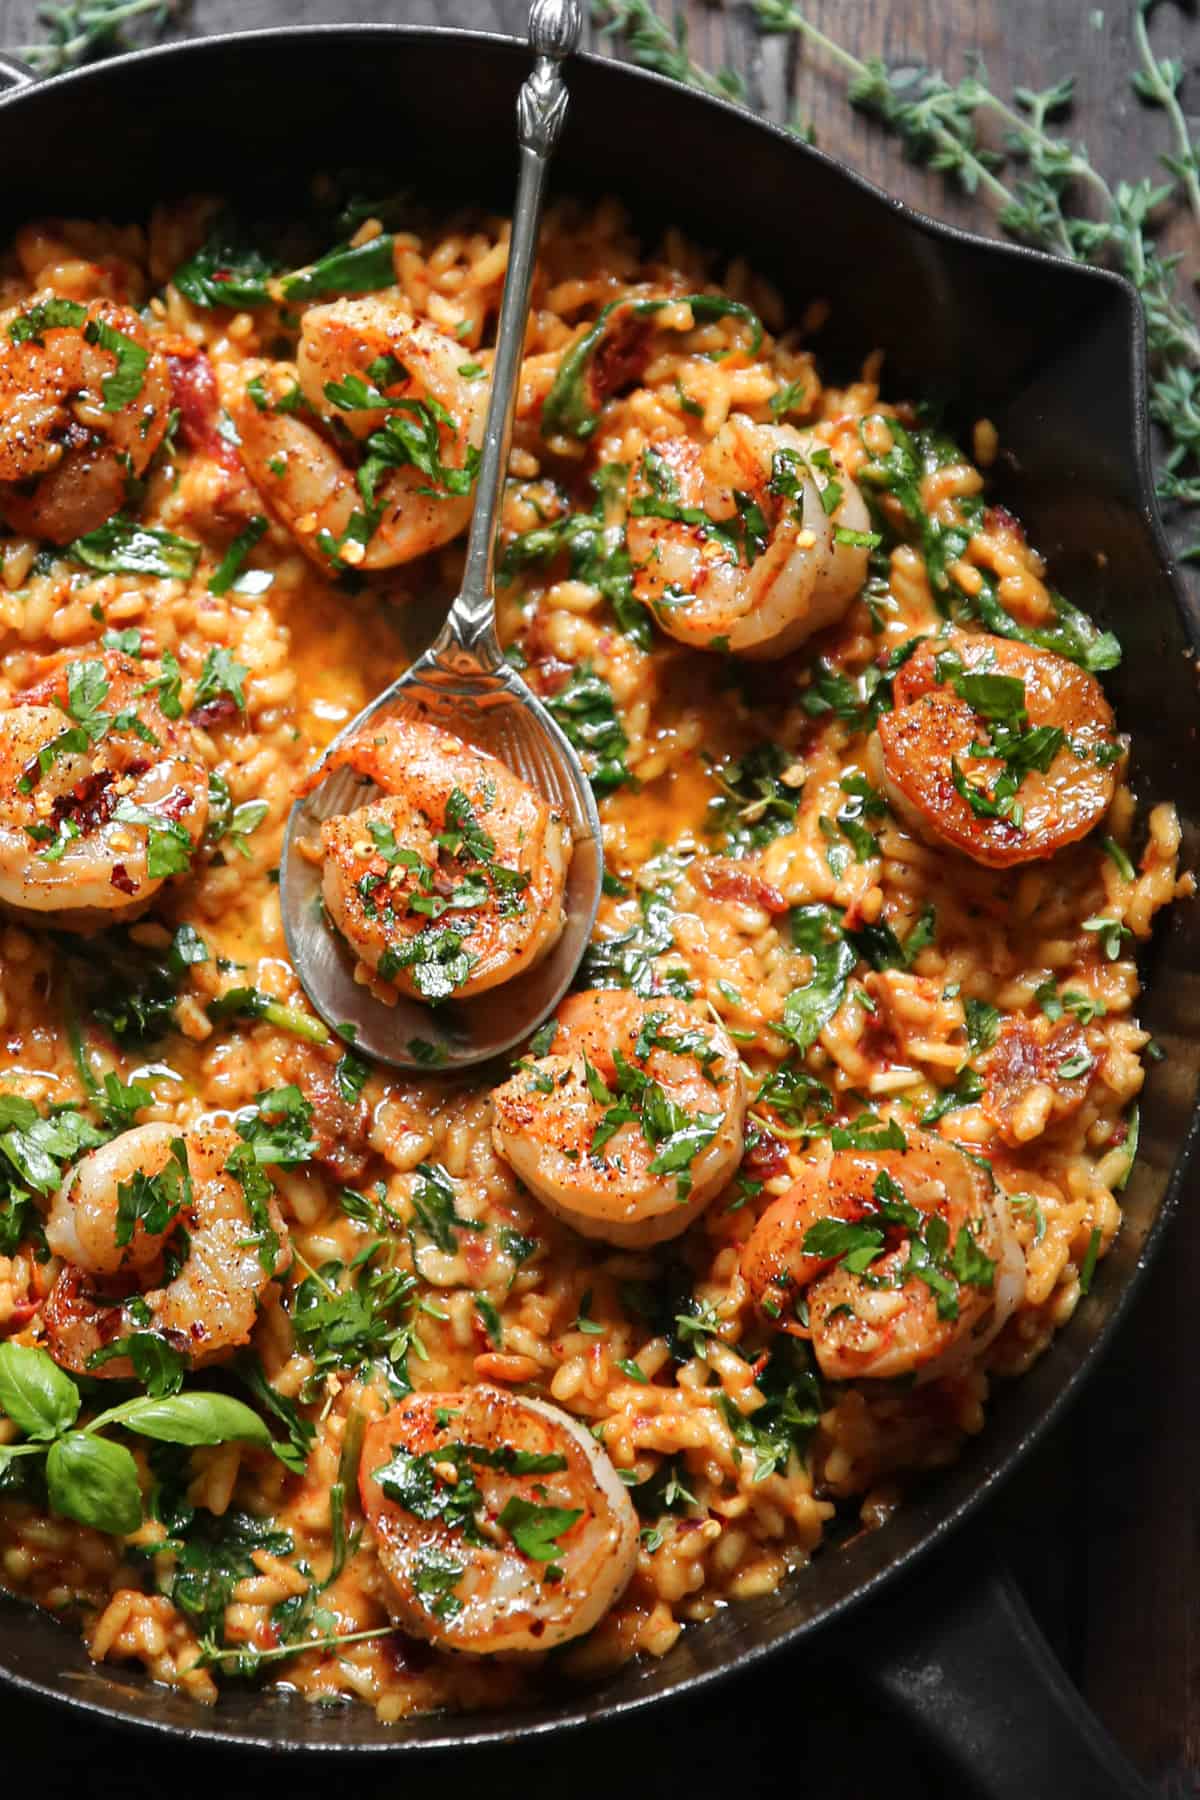 Shrimp Risotto with Spinach and Sun-Dried Tomatoes in a cast iron pan.